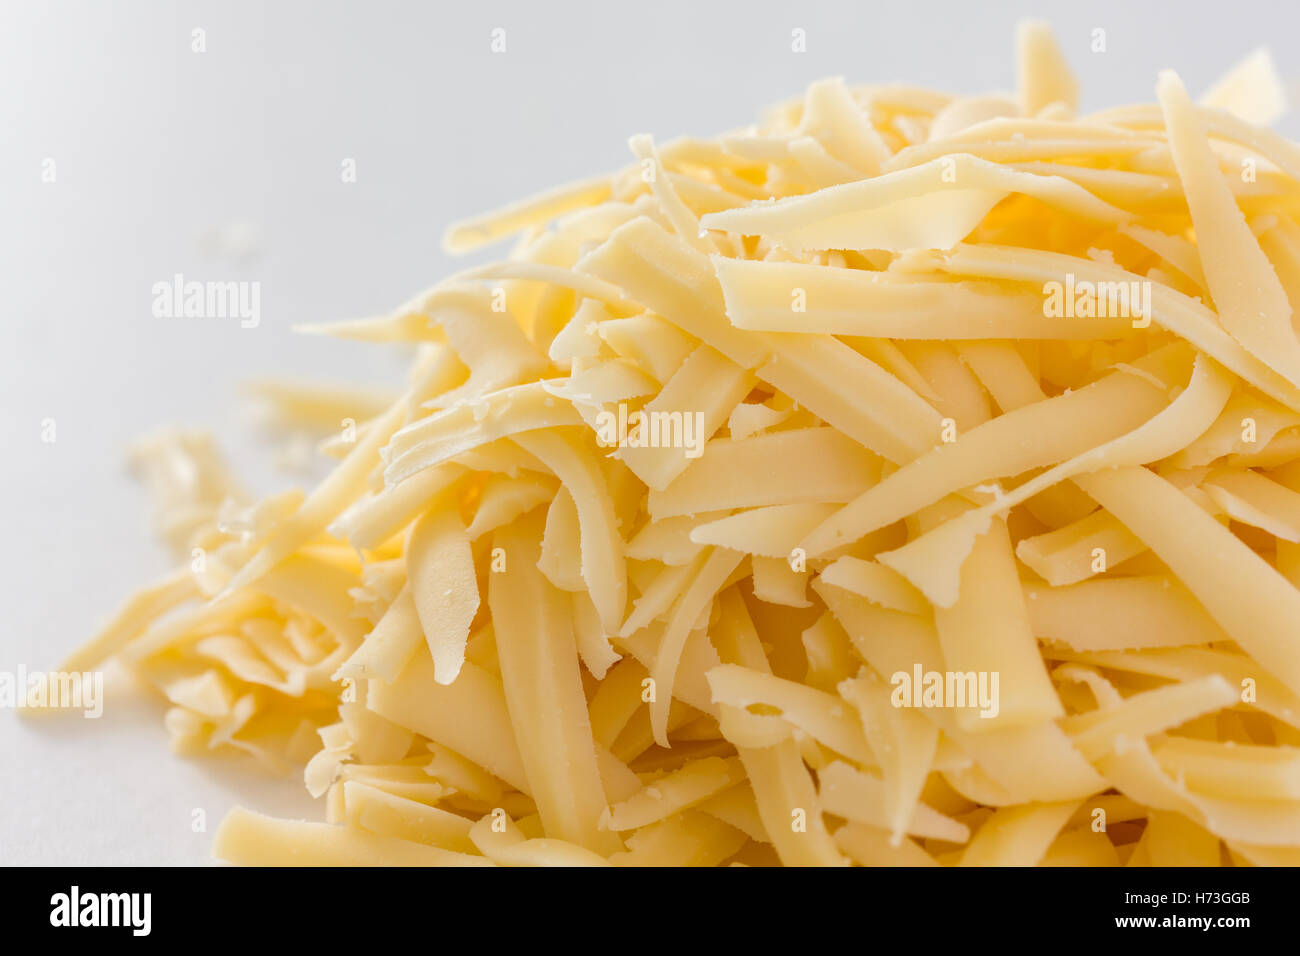 Grated yellow hard cheese on white Stock Photo